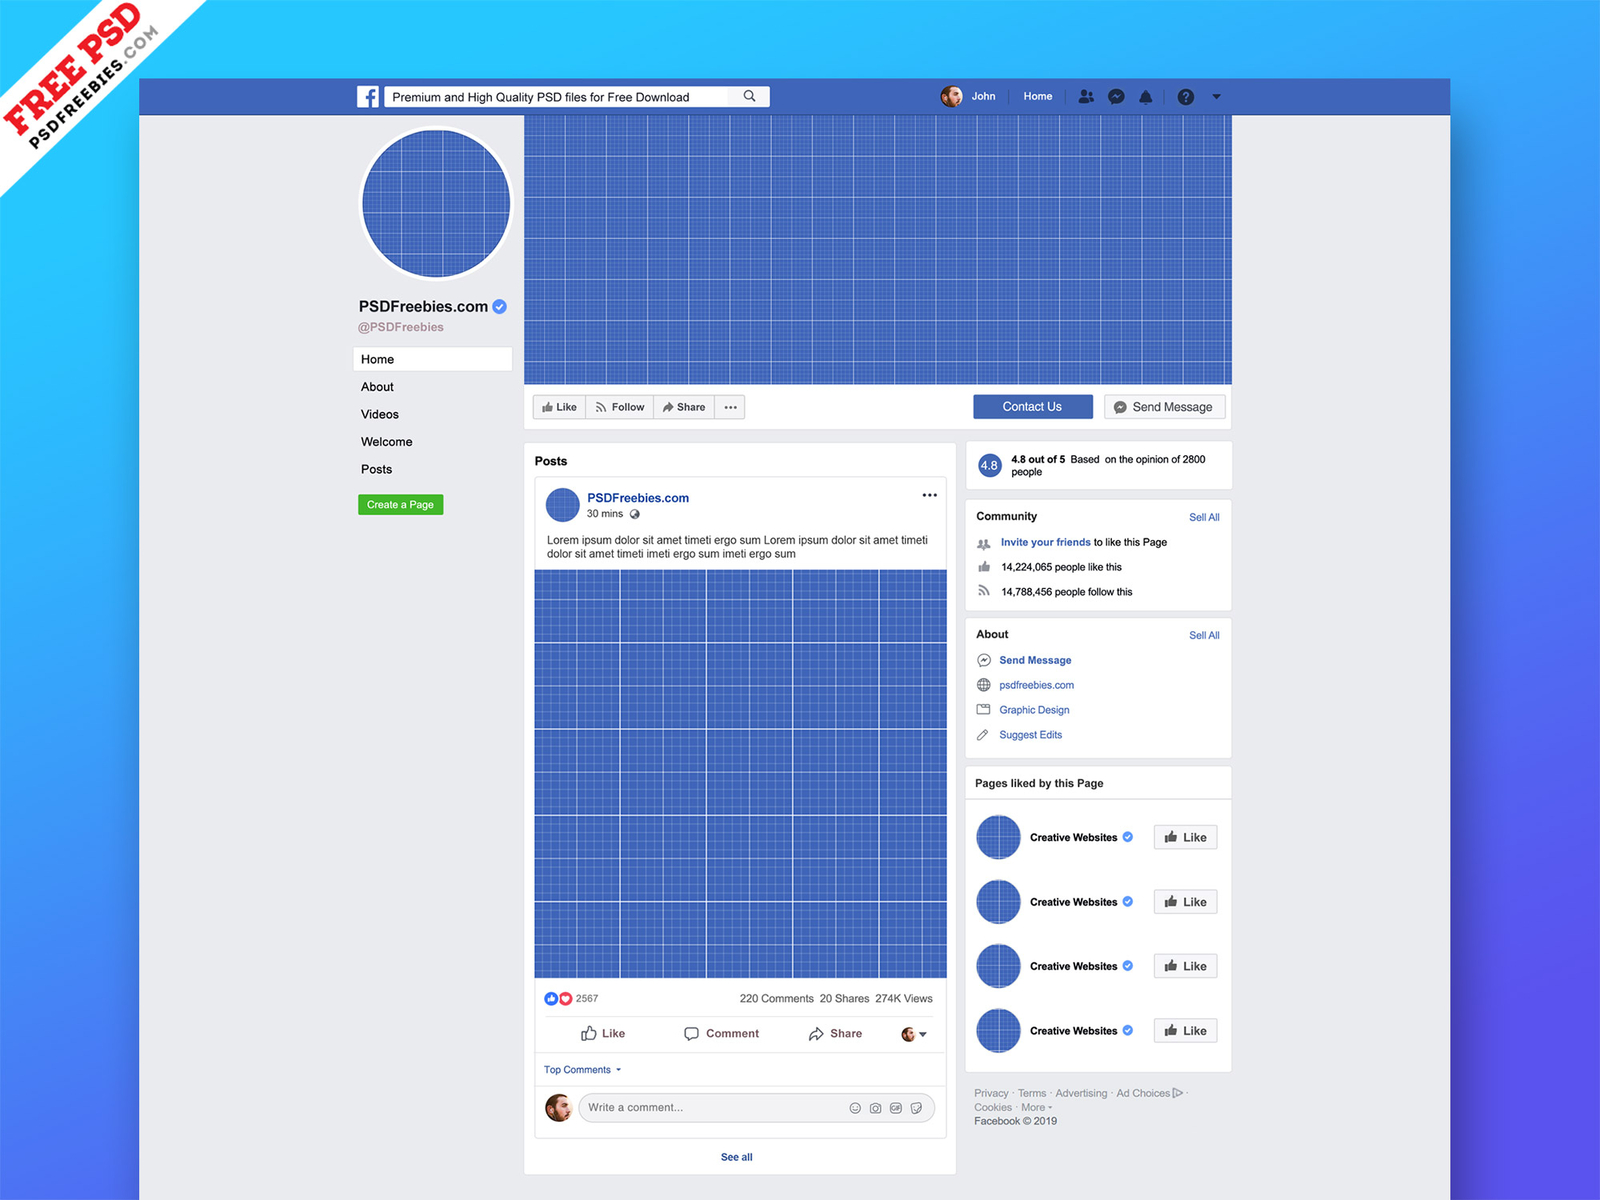 New Facebook Page Mockup 2019 PSD by PSD Freebies on Dribbble